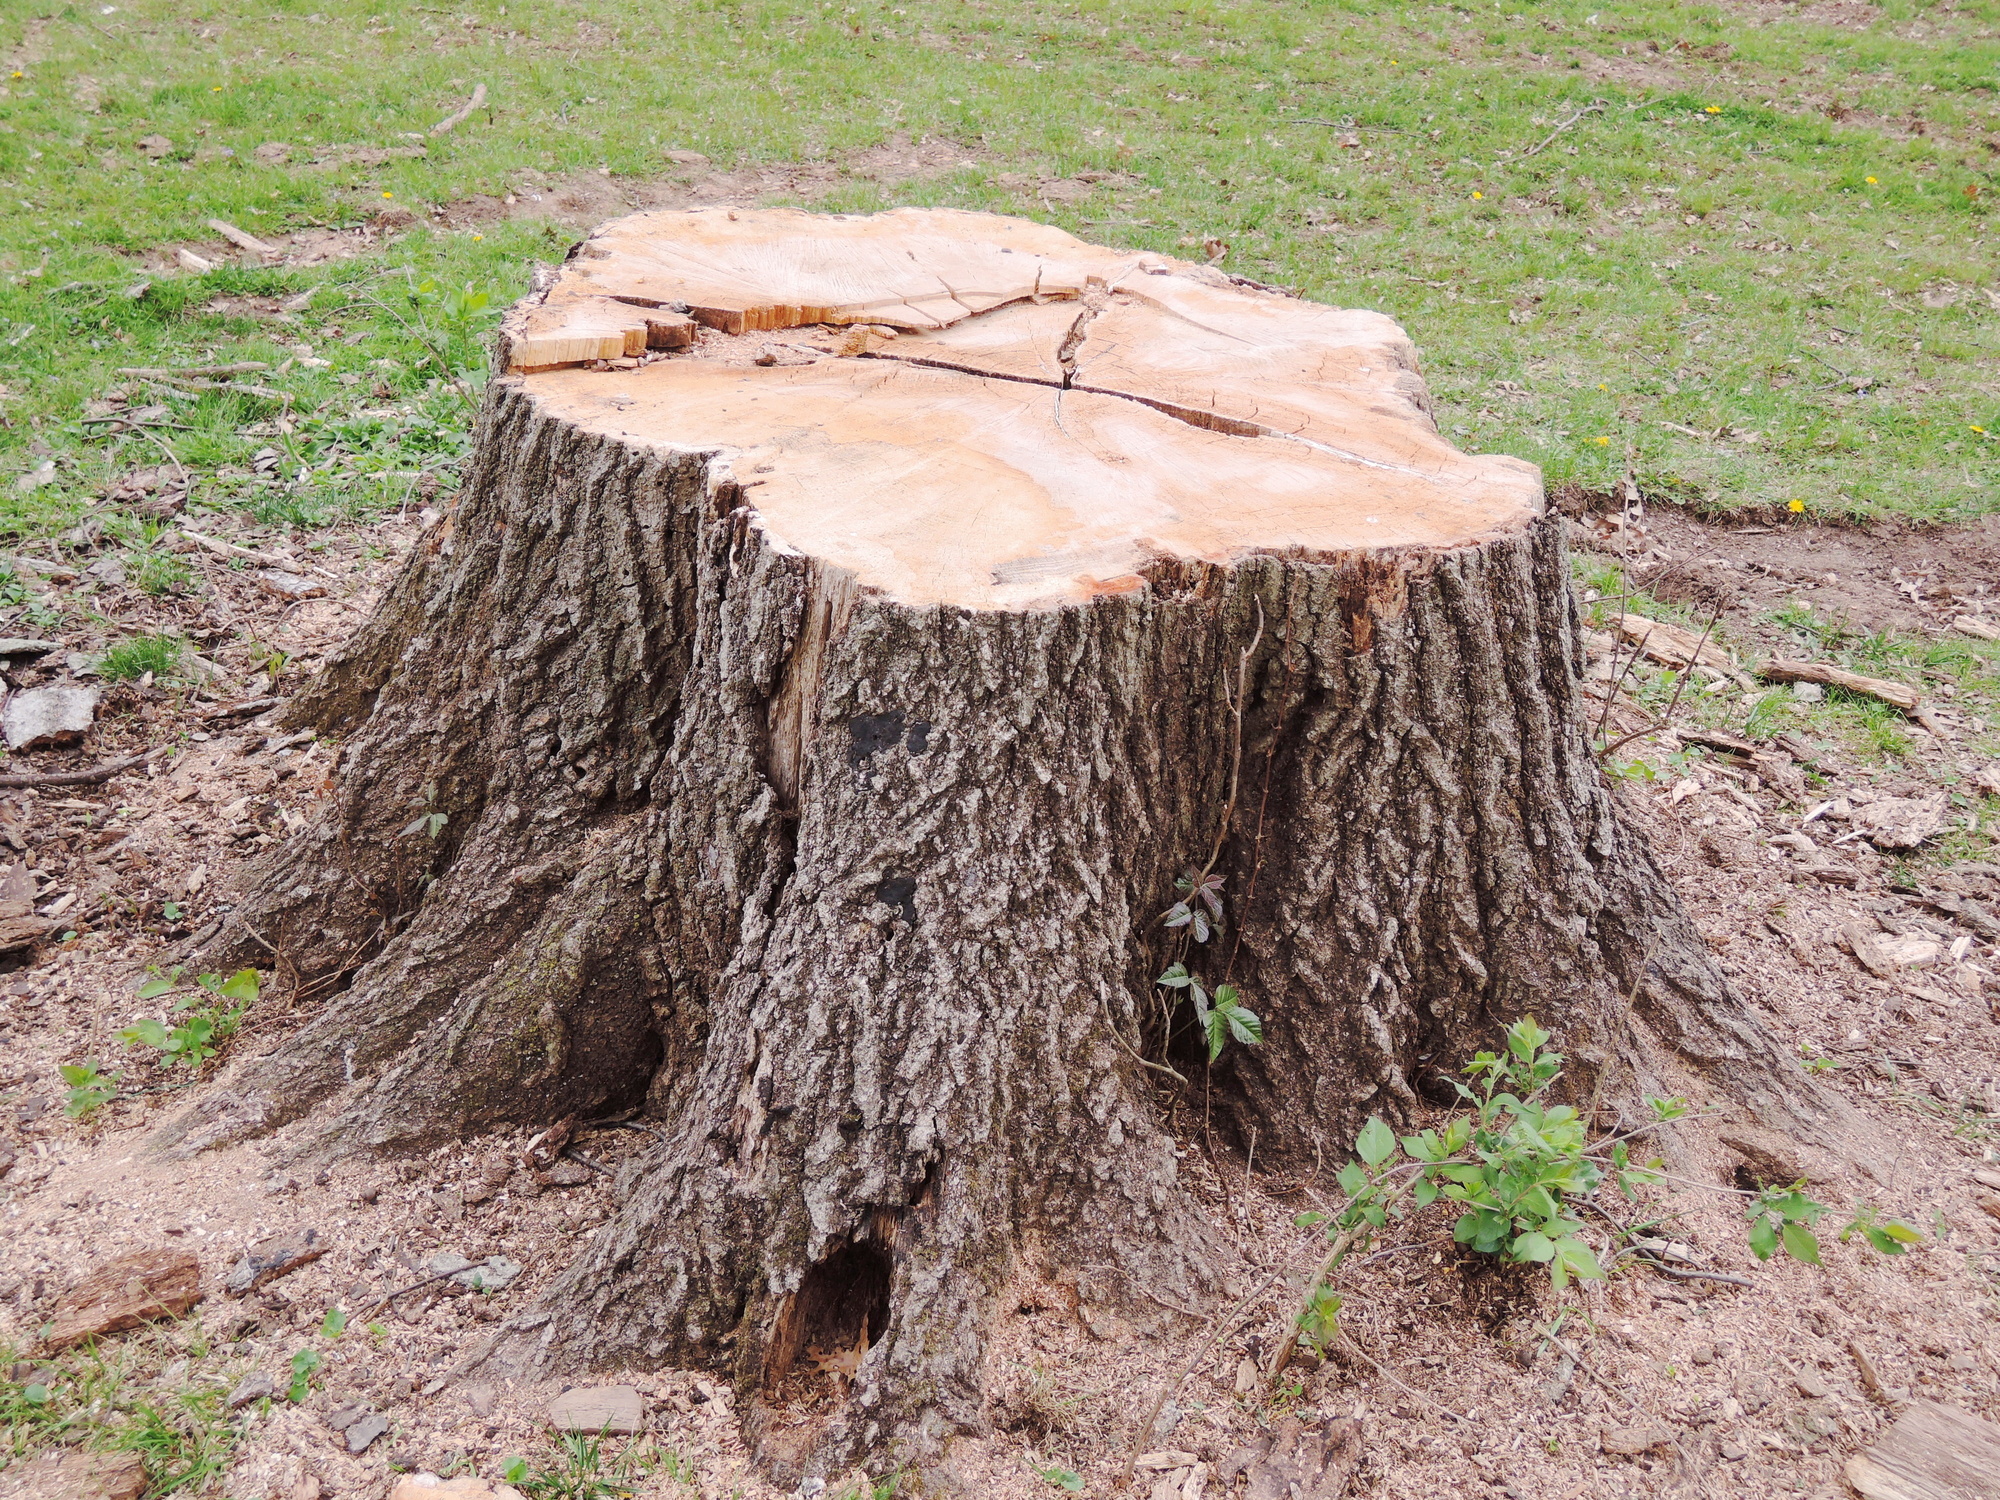 Stump of a freshly cut tree, tree stump removal concept image